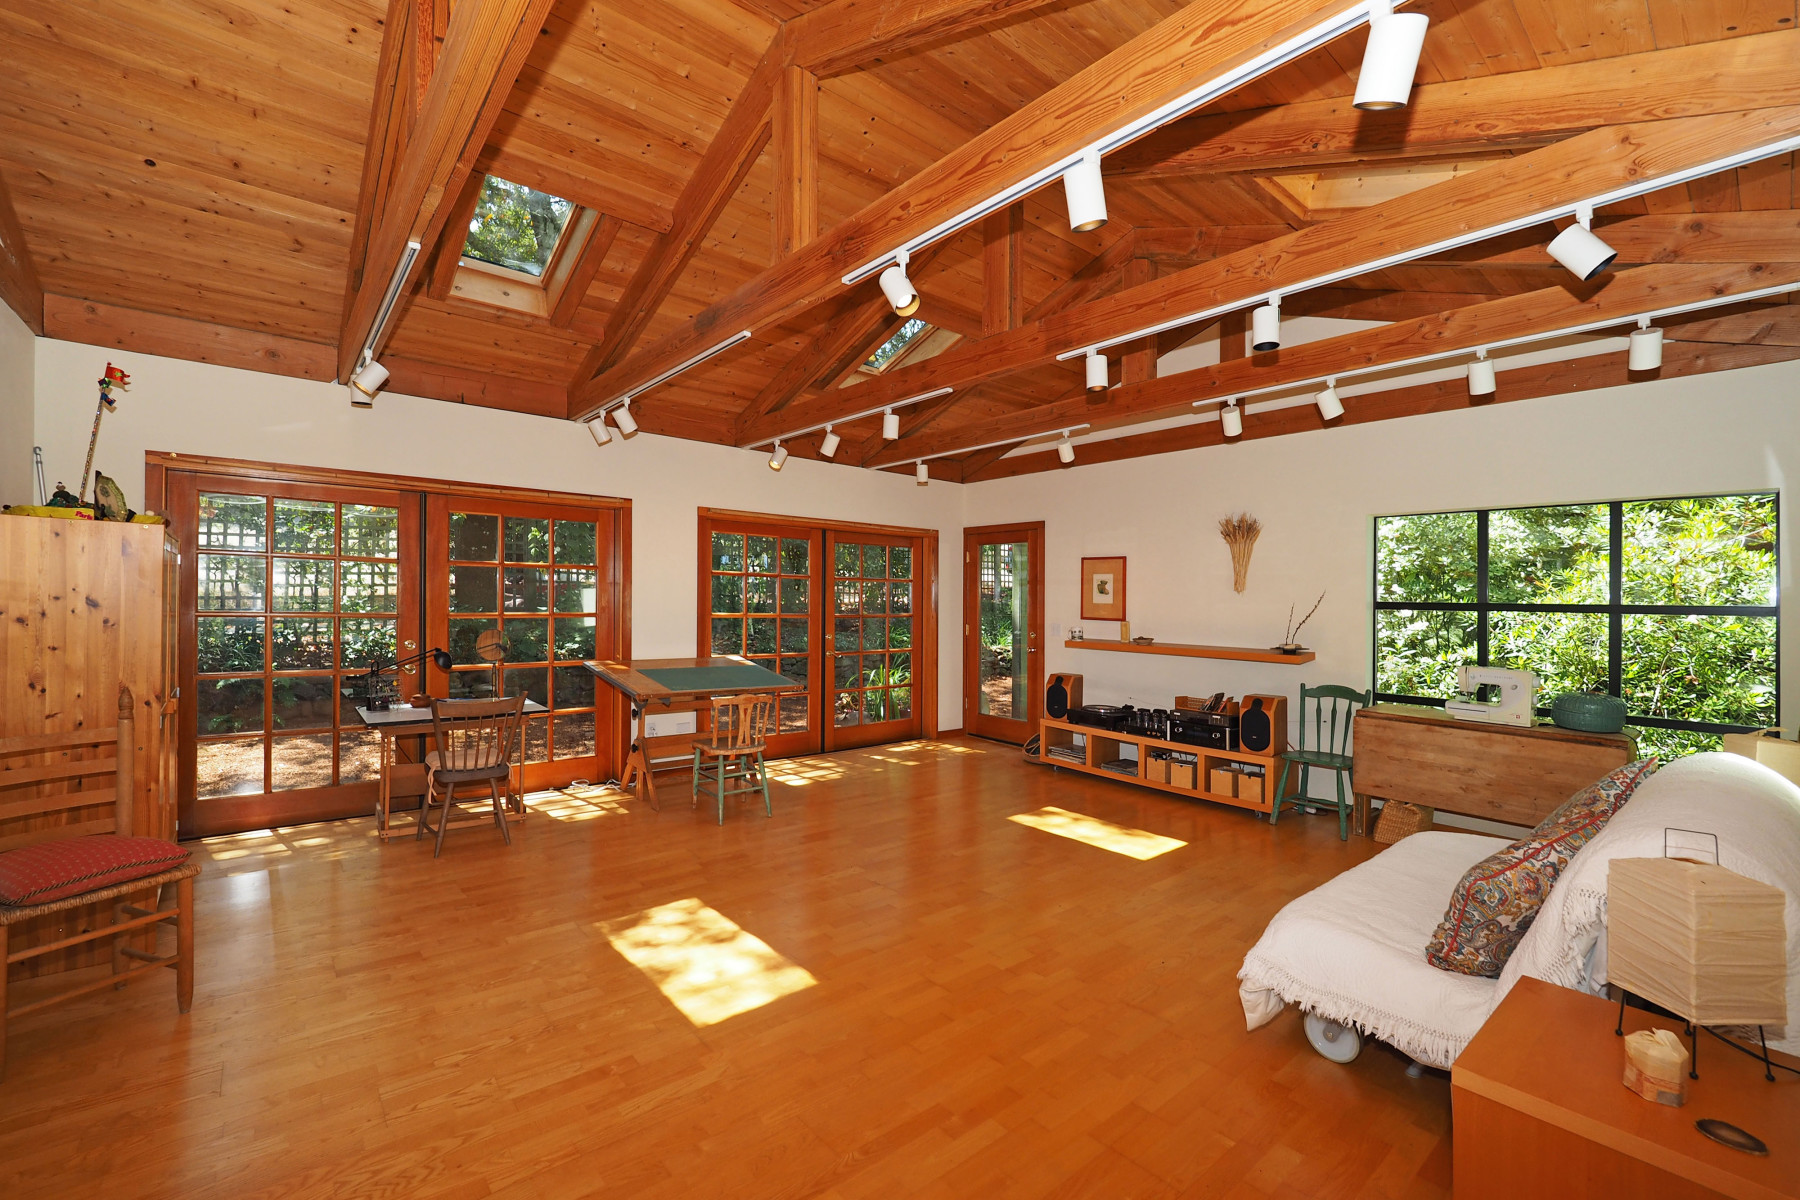 Enchanting Retreat in the Sonoma Hills for Sale-6063 Hyland Way, #LiveLifeSonomaStyle